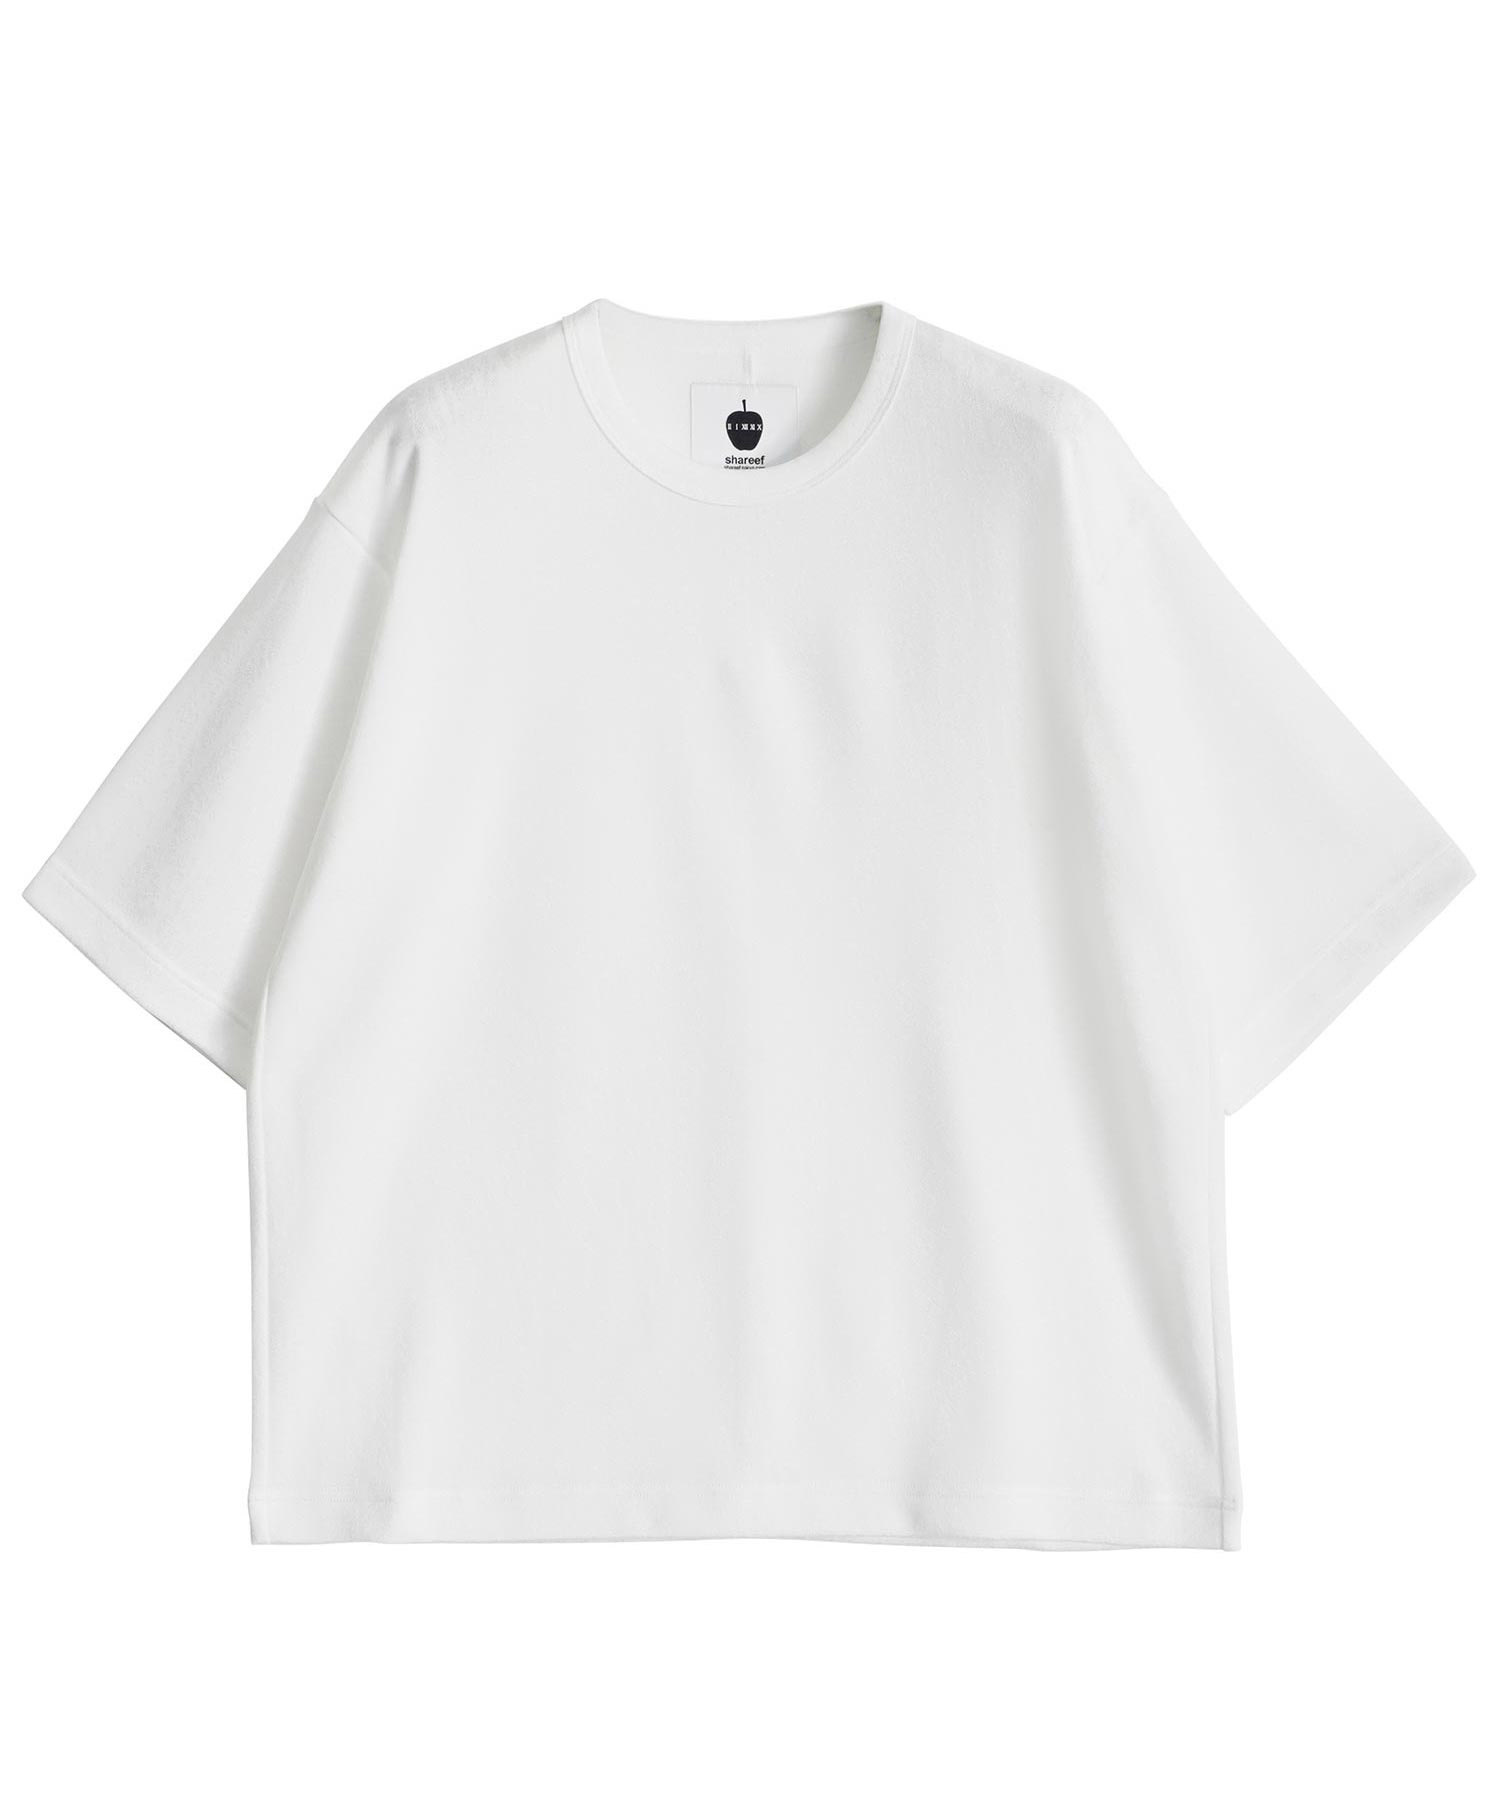 FOREST JQ S/S T-SHIRTS